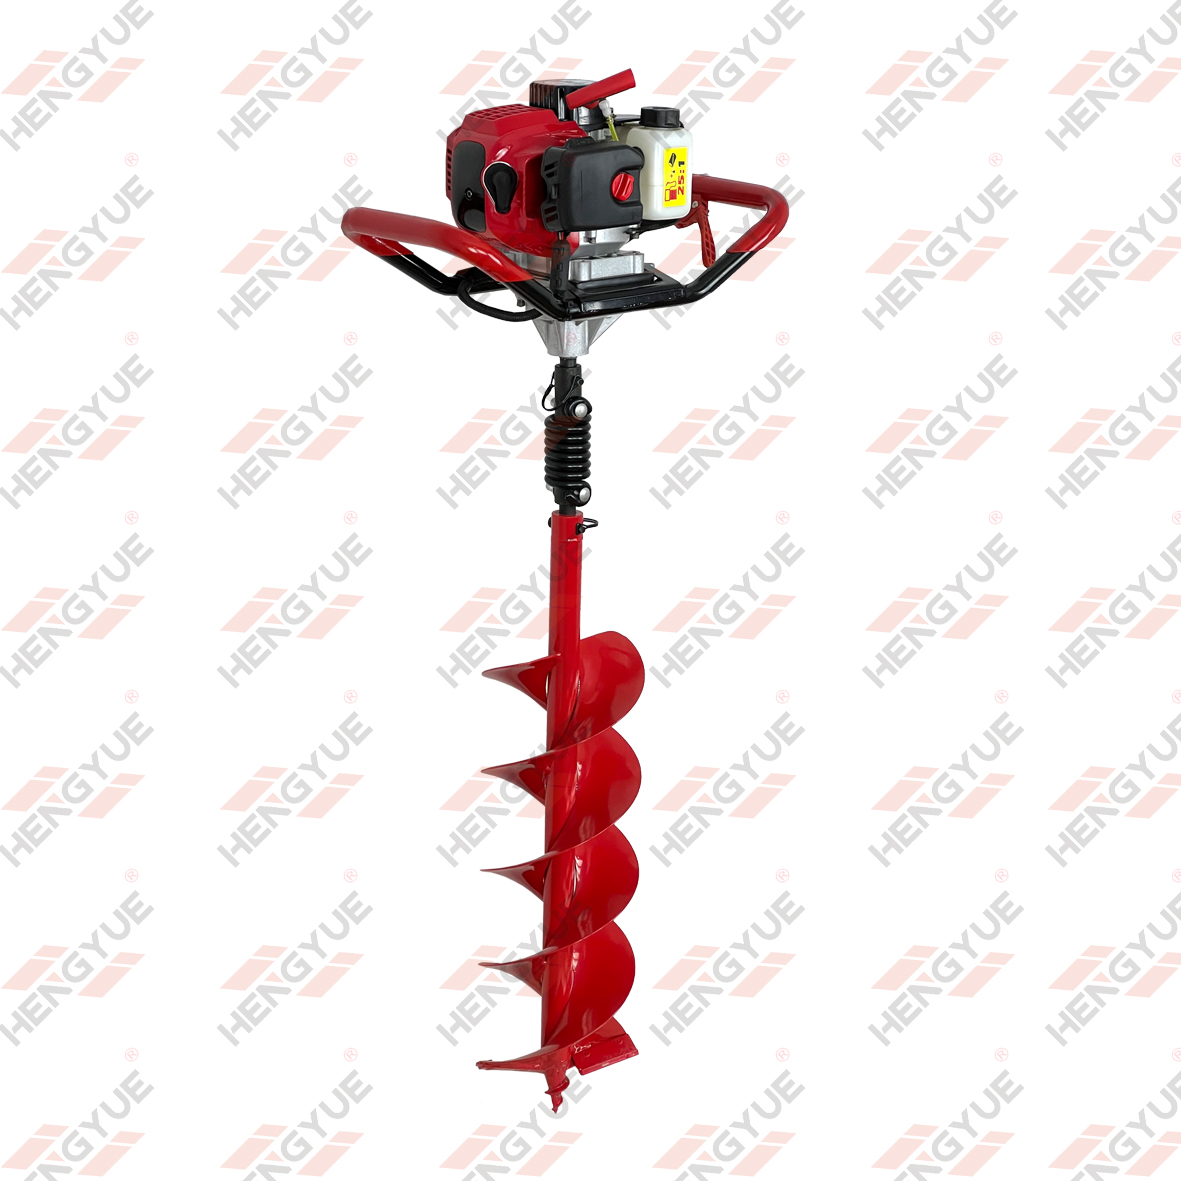 Powered by HONDA GX35 Hand Held Earth Auger Drilling Machine